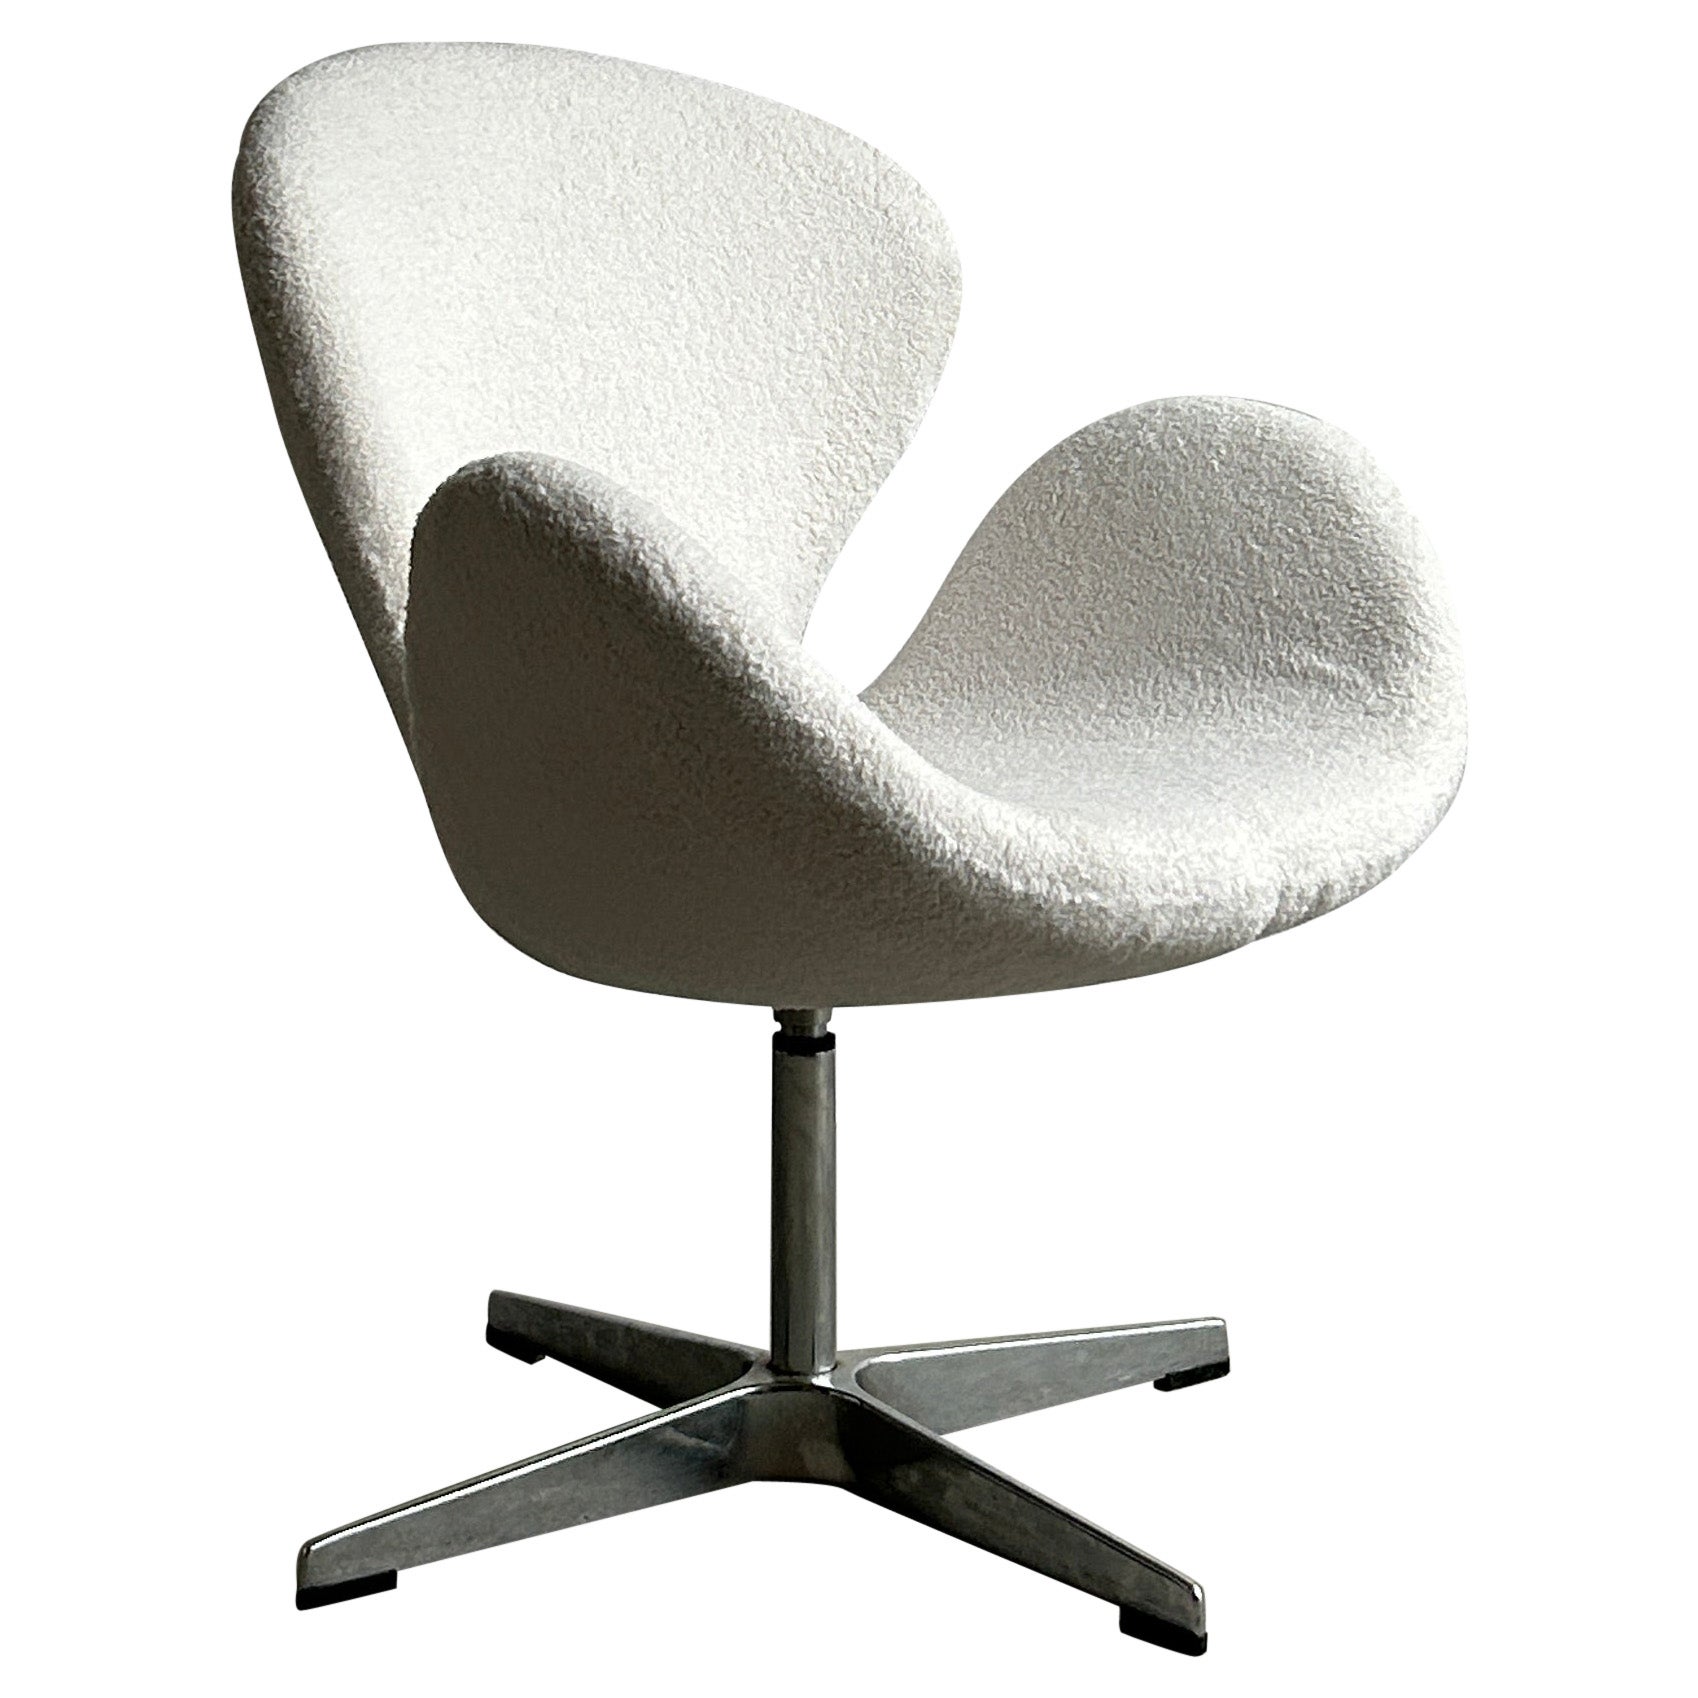 Vintage Swivel Armchair in Style of 'Swan' Chair by Arne Jacobsen, White Boucle